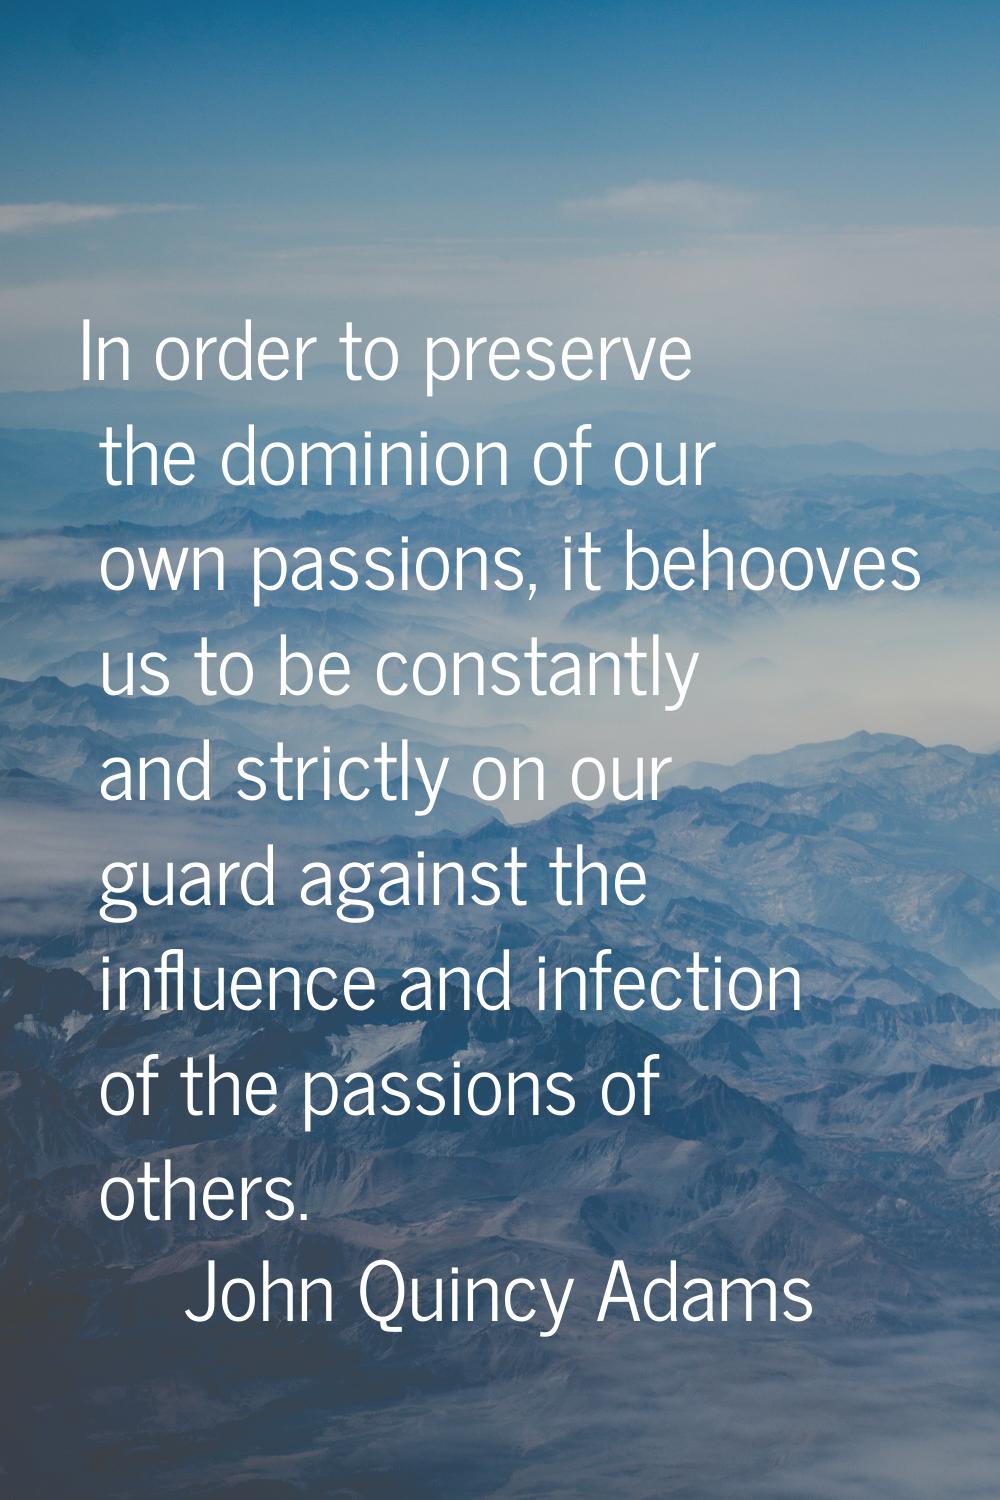 In order to preserve the dominion of our own passions, it behooves us to be constantly and strictly